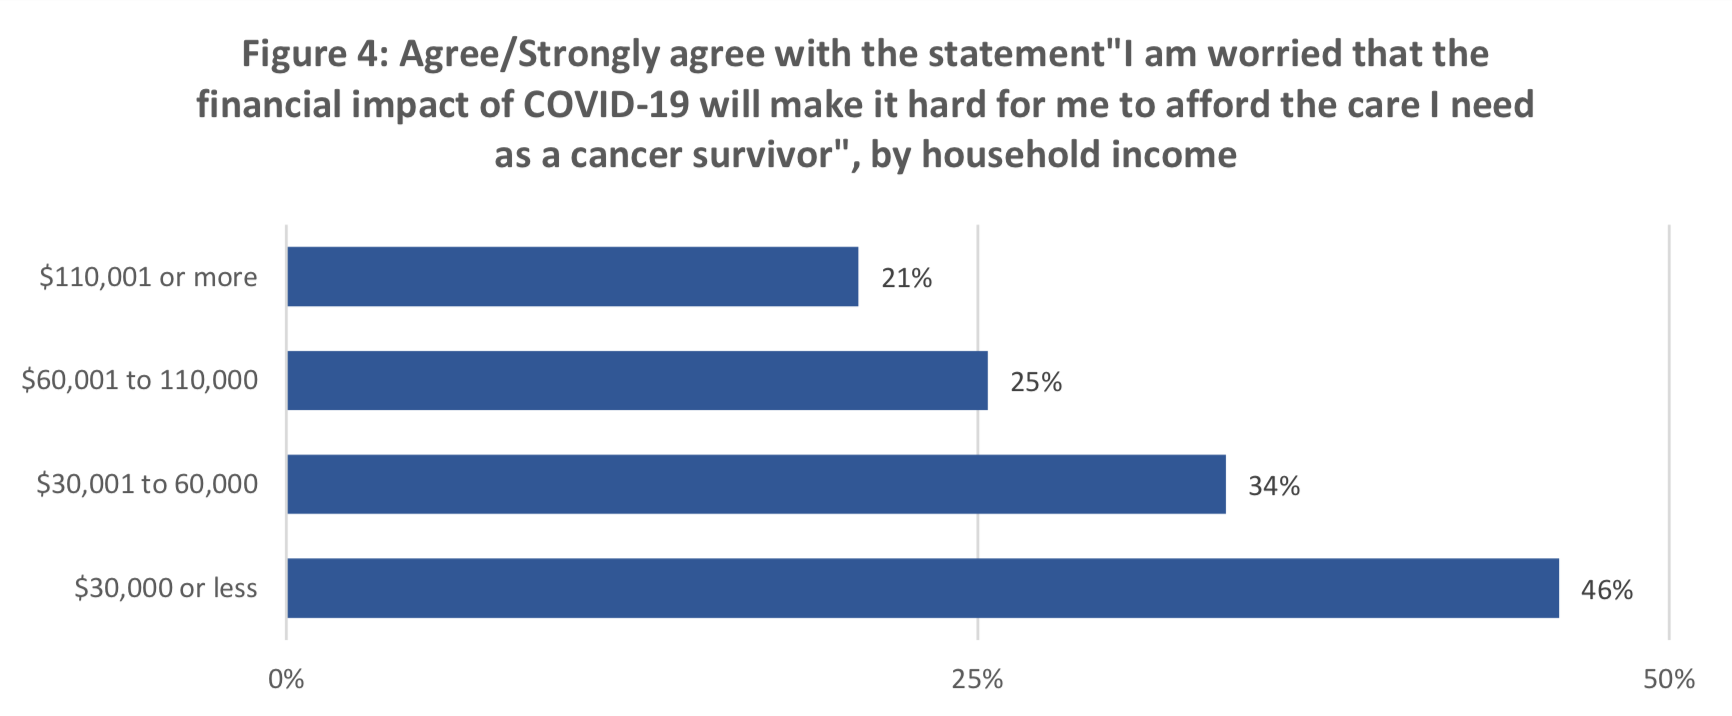 Figure 4: Agree/Strongly agree with the statement"I am worried that the financial impact of COVID-19 will make it hard for me to afford the care I need as a cancer survivor", by household income